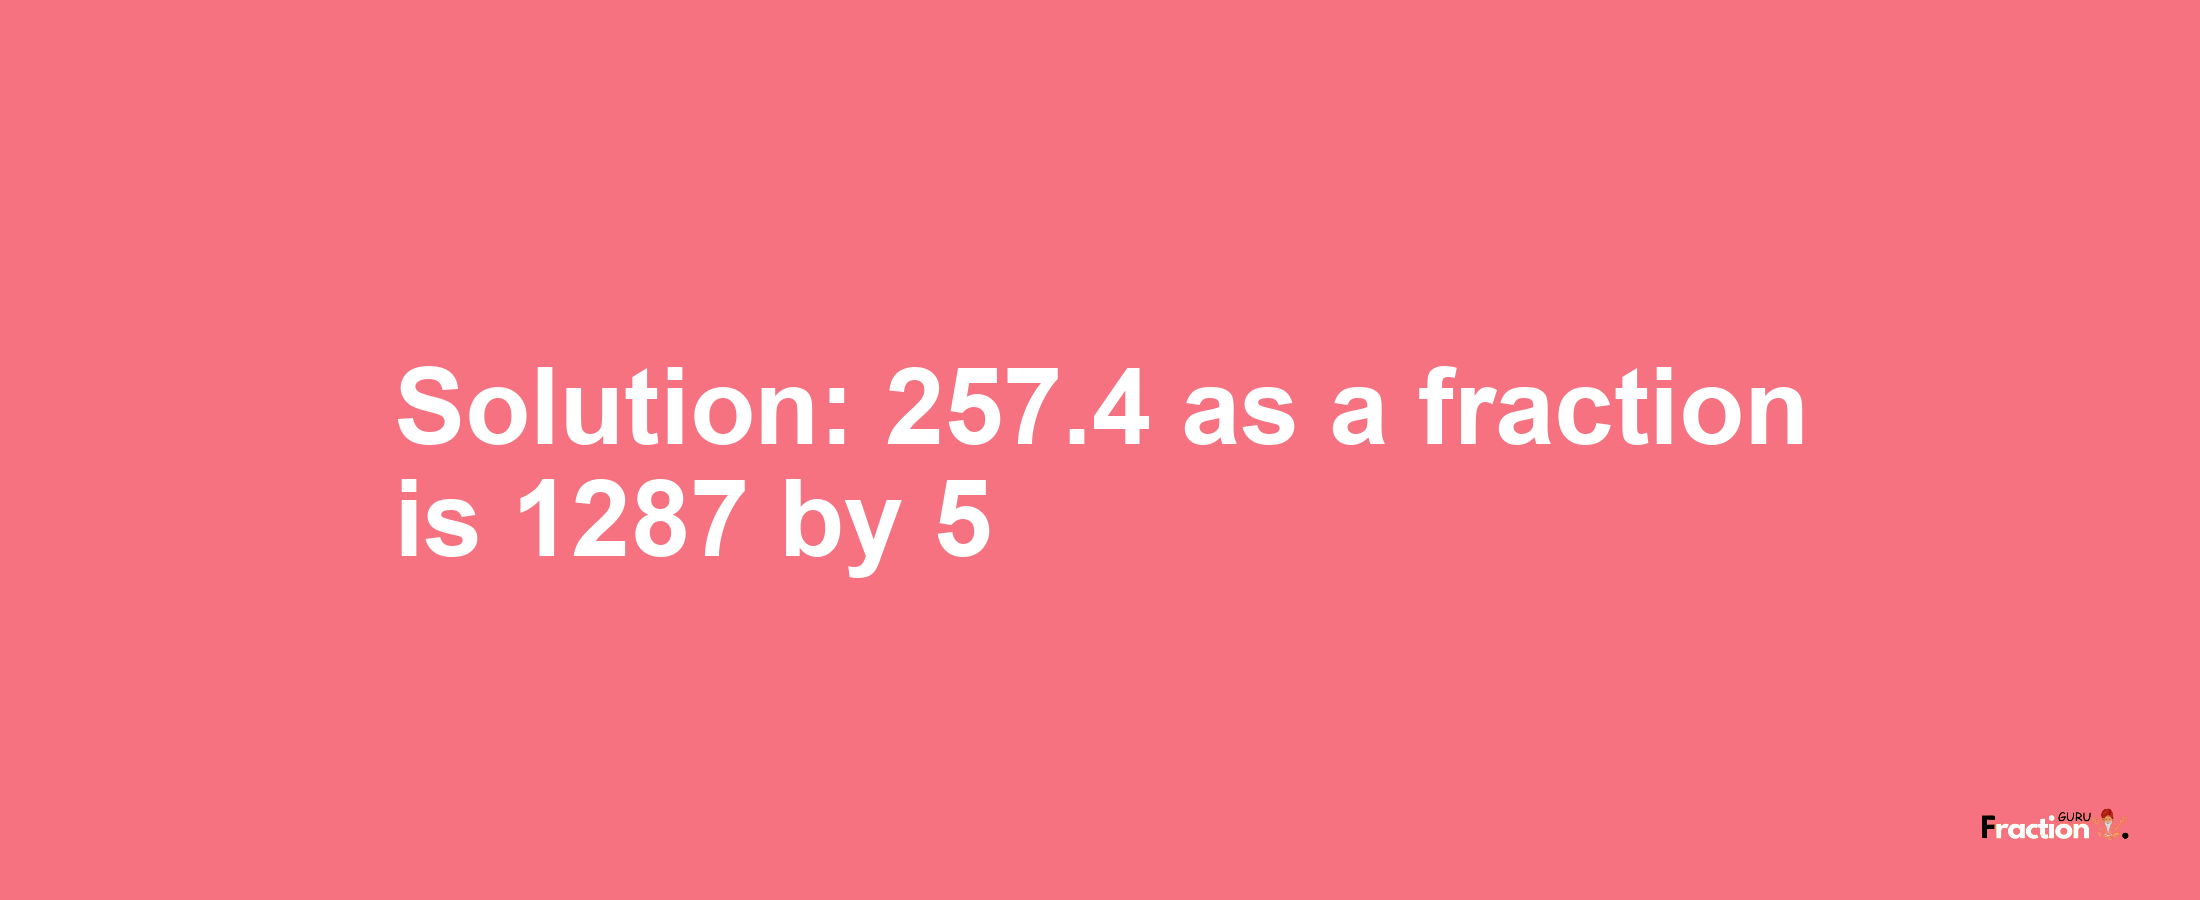 Solution:257.4 as a fraction is 1287/5